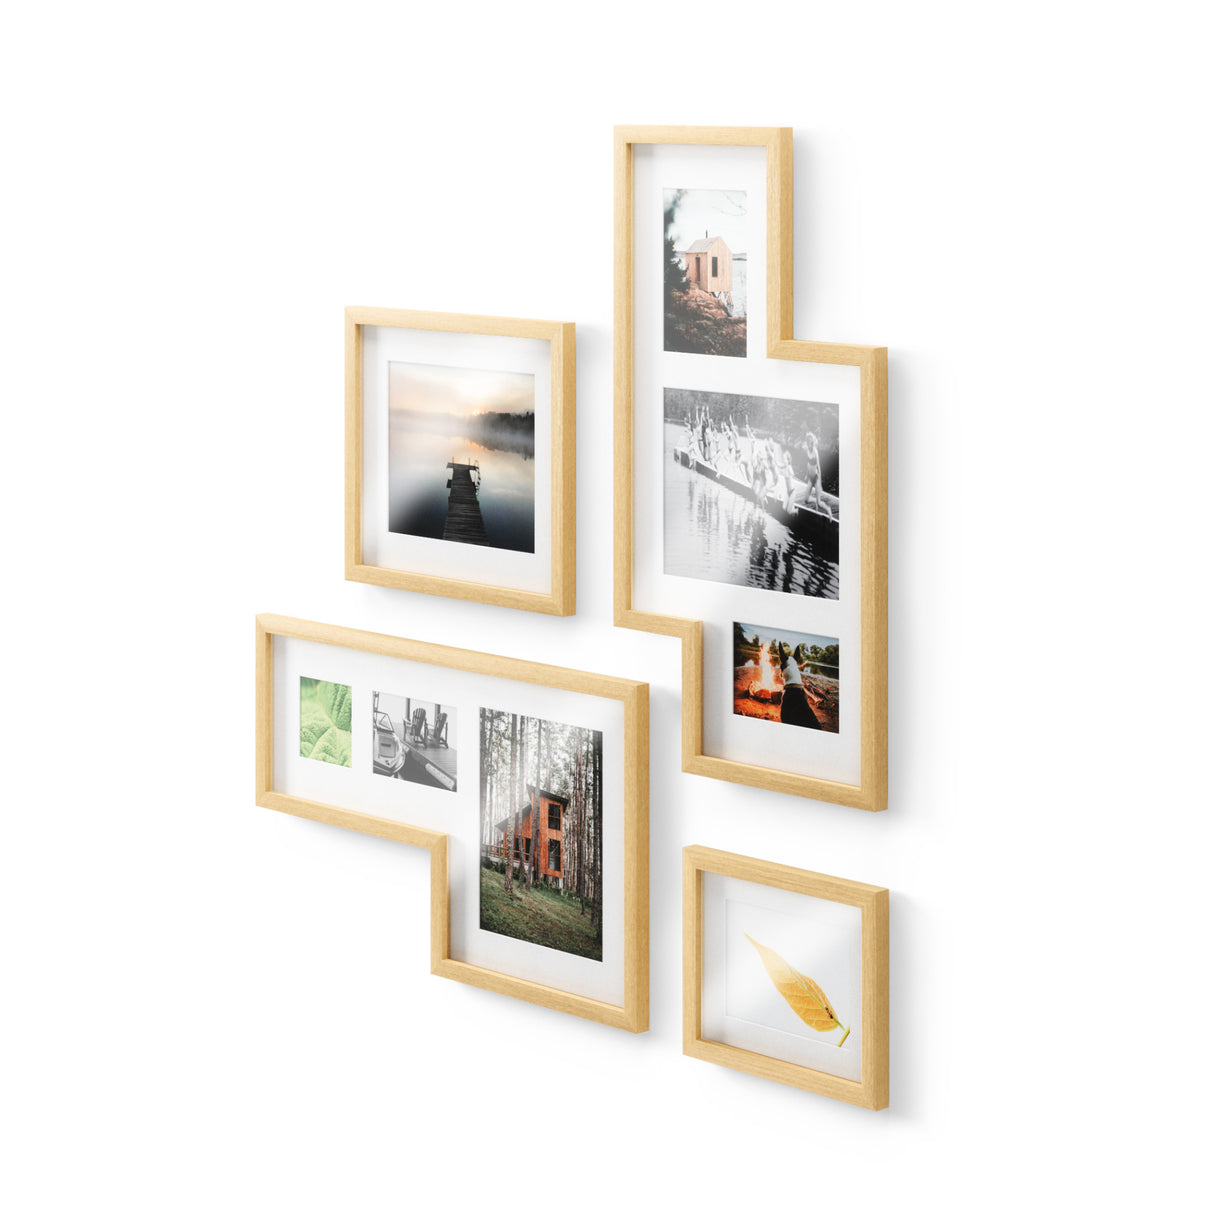 Front Loading 5x7 Frame in Black - Set of 12 - Use as 4x6 Frame